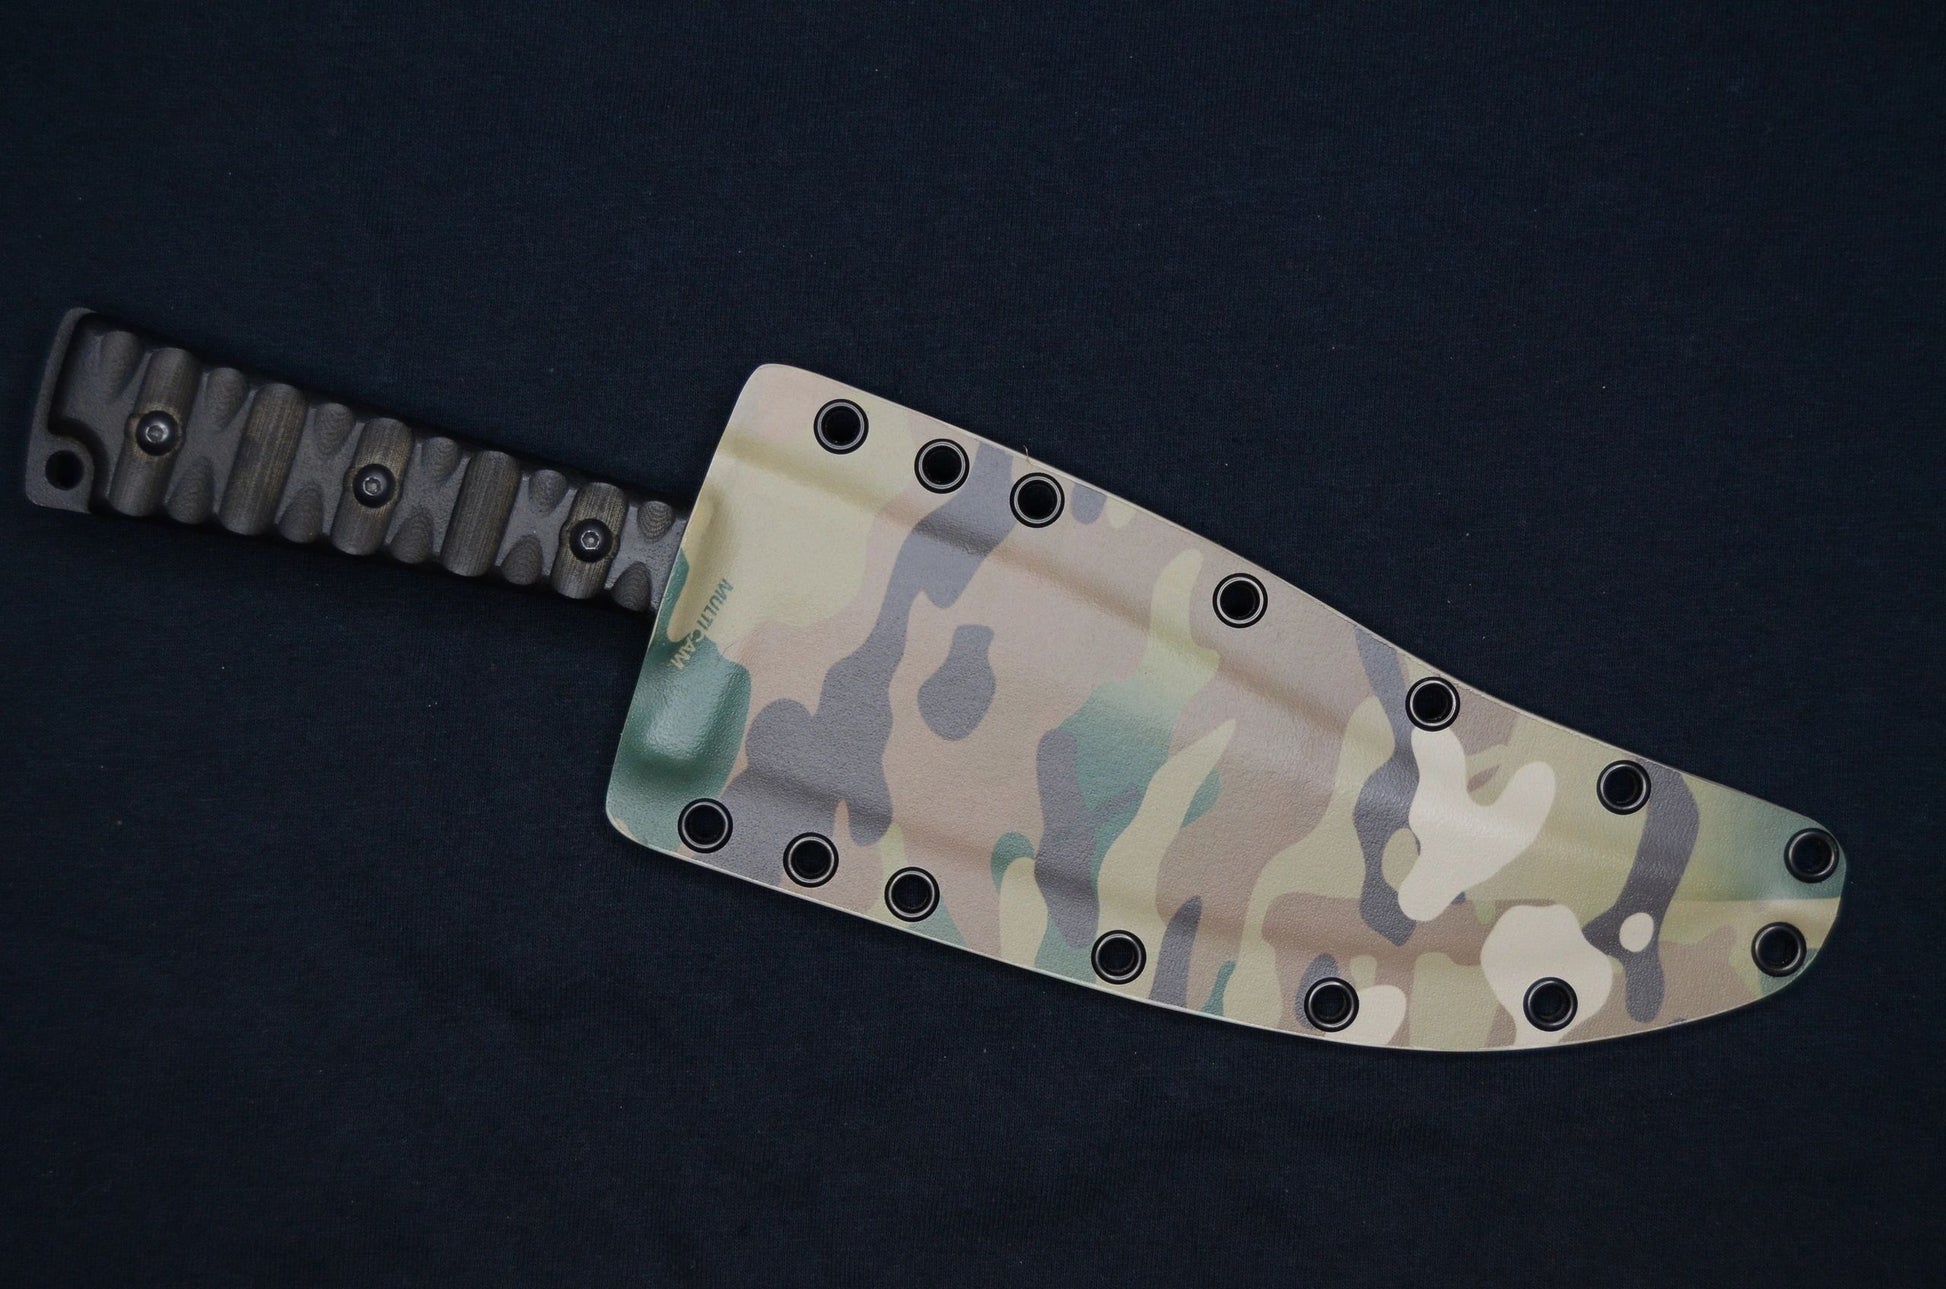 TOPS KNIVES PRATHER WAR BOWIE CUSTOM KYDEX SHEATH BUILT YOUR WAY (KNIFE NOT INCLUDED)